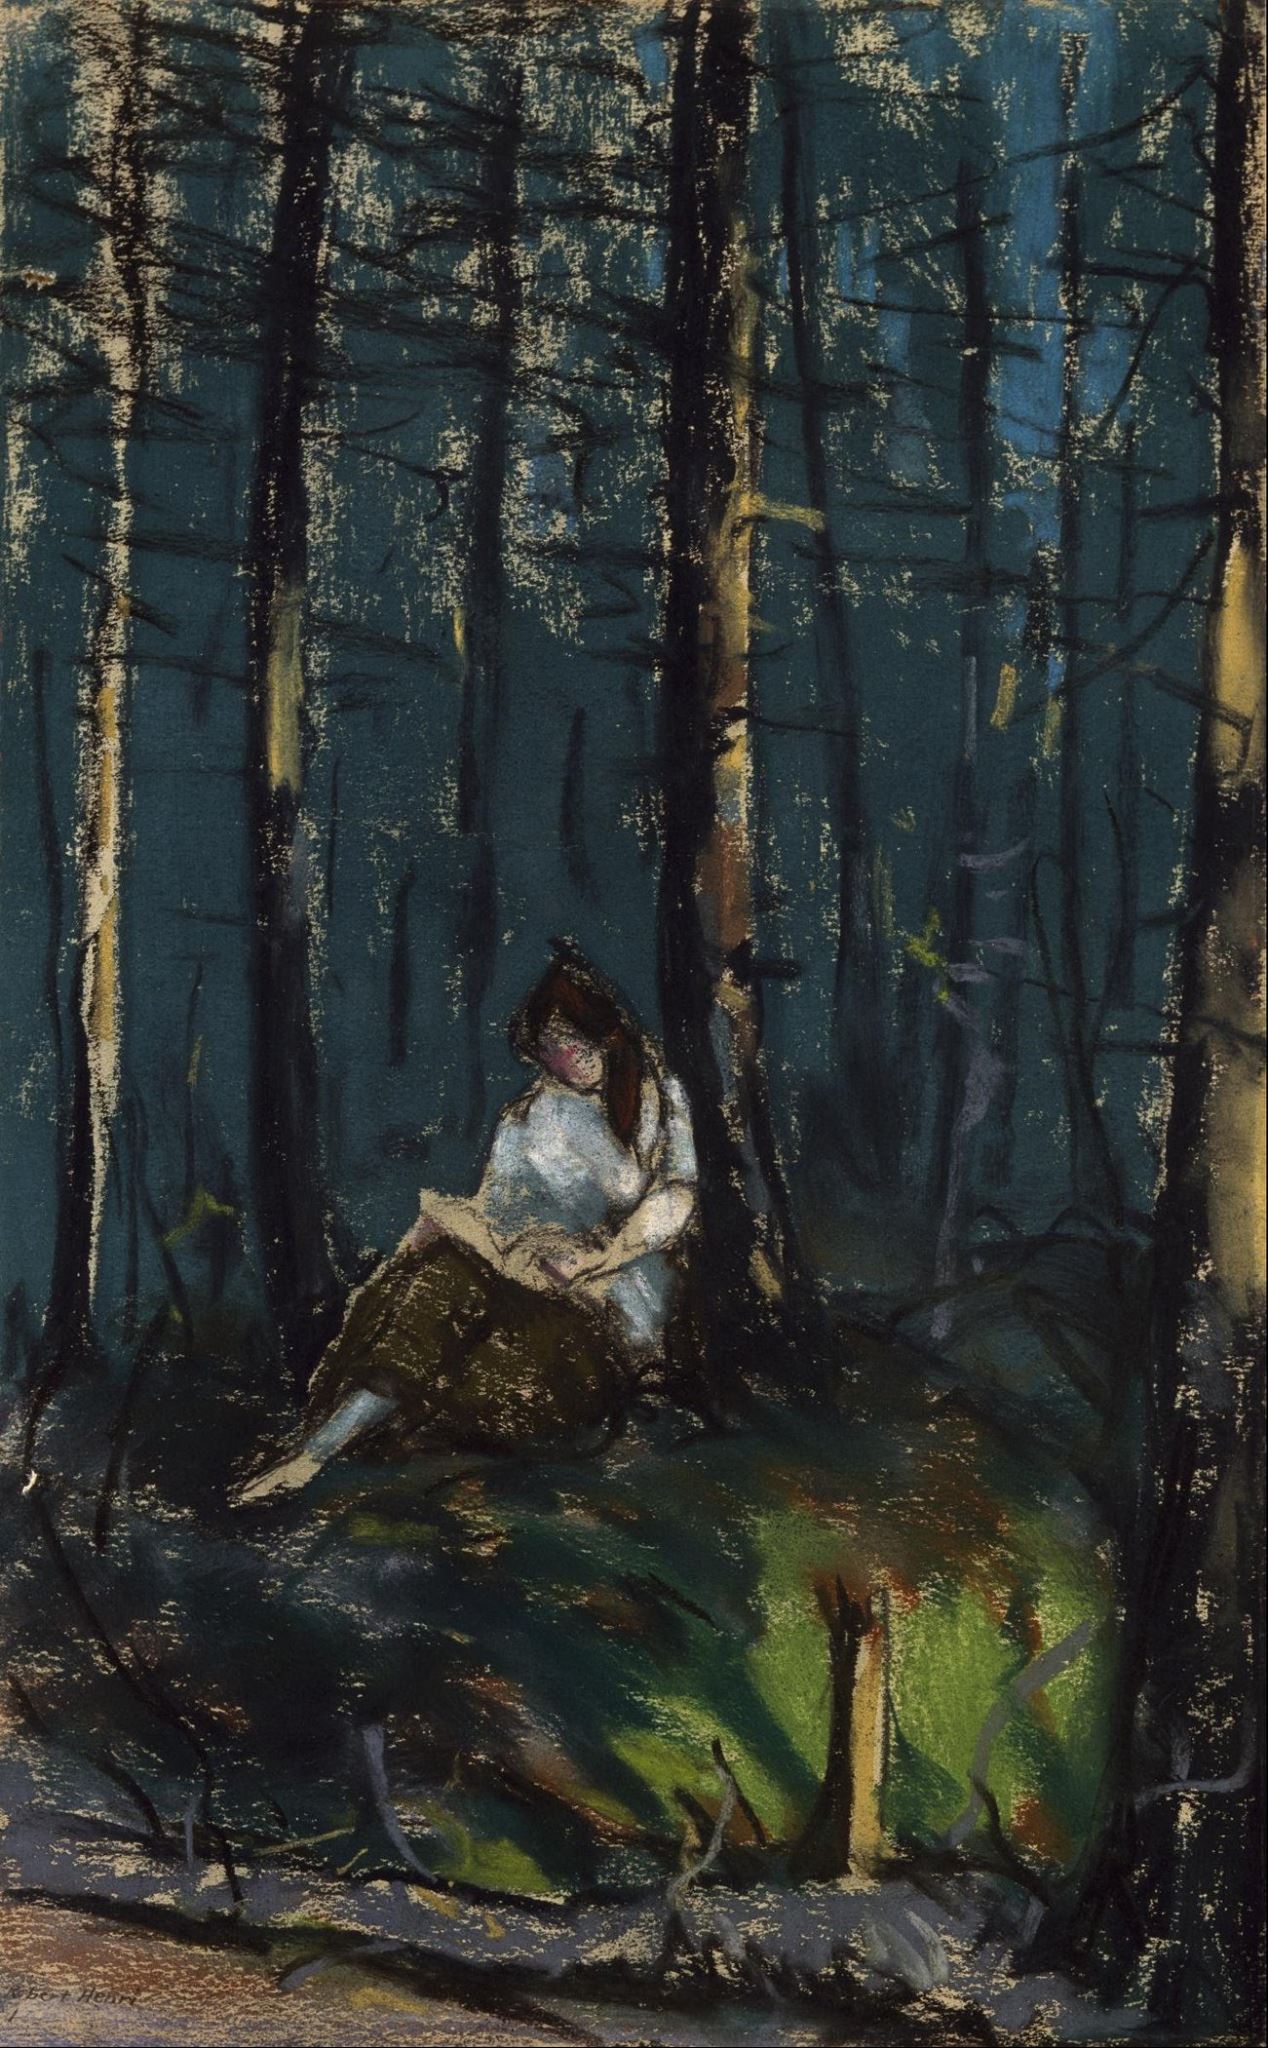 Reader in the Forest, 1918. Robert Henri (American, 1865-1929)